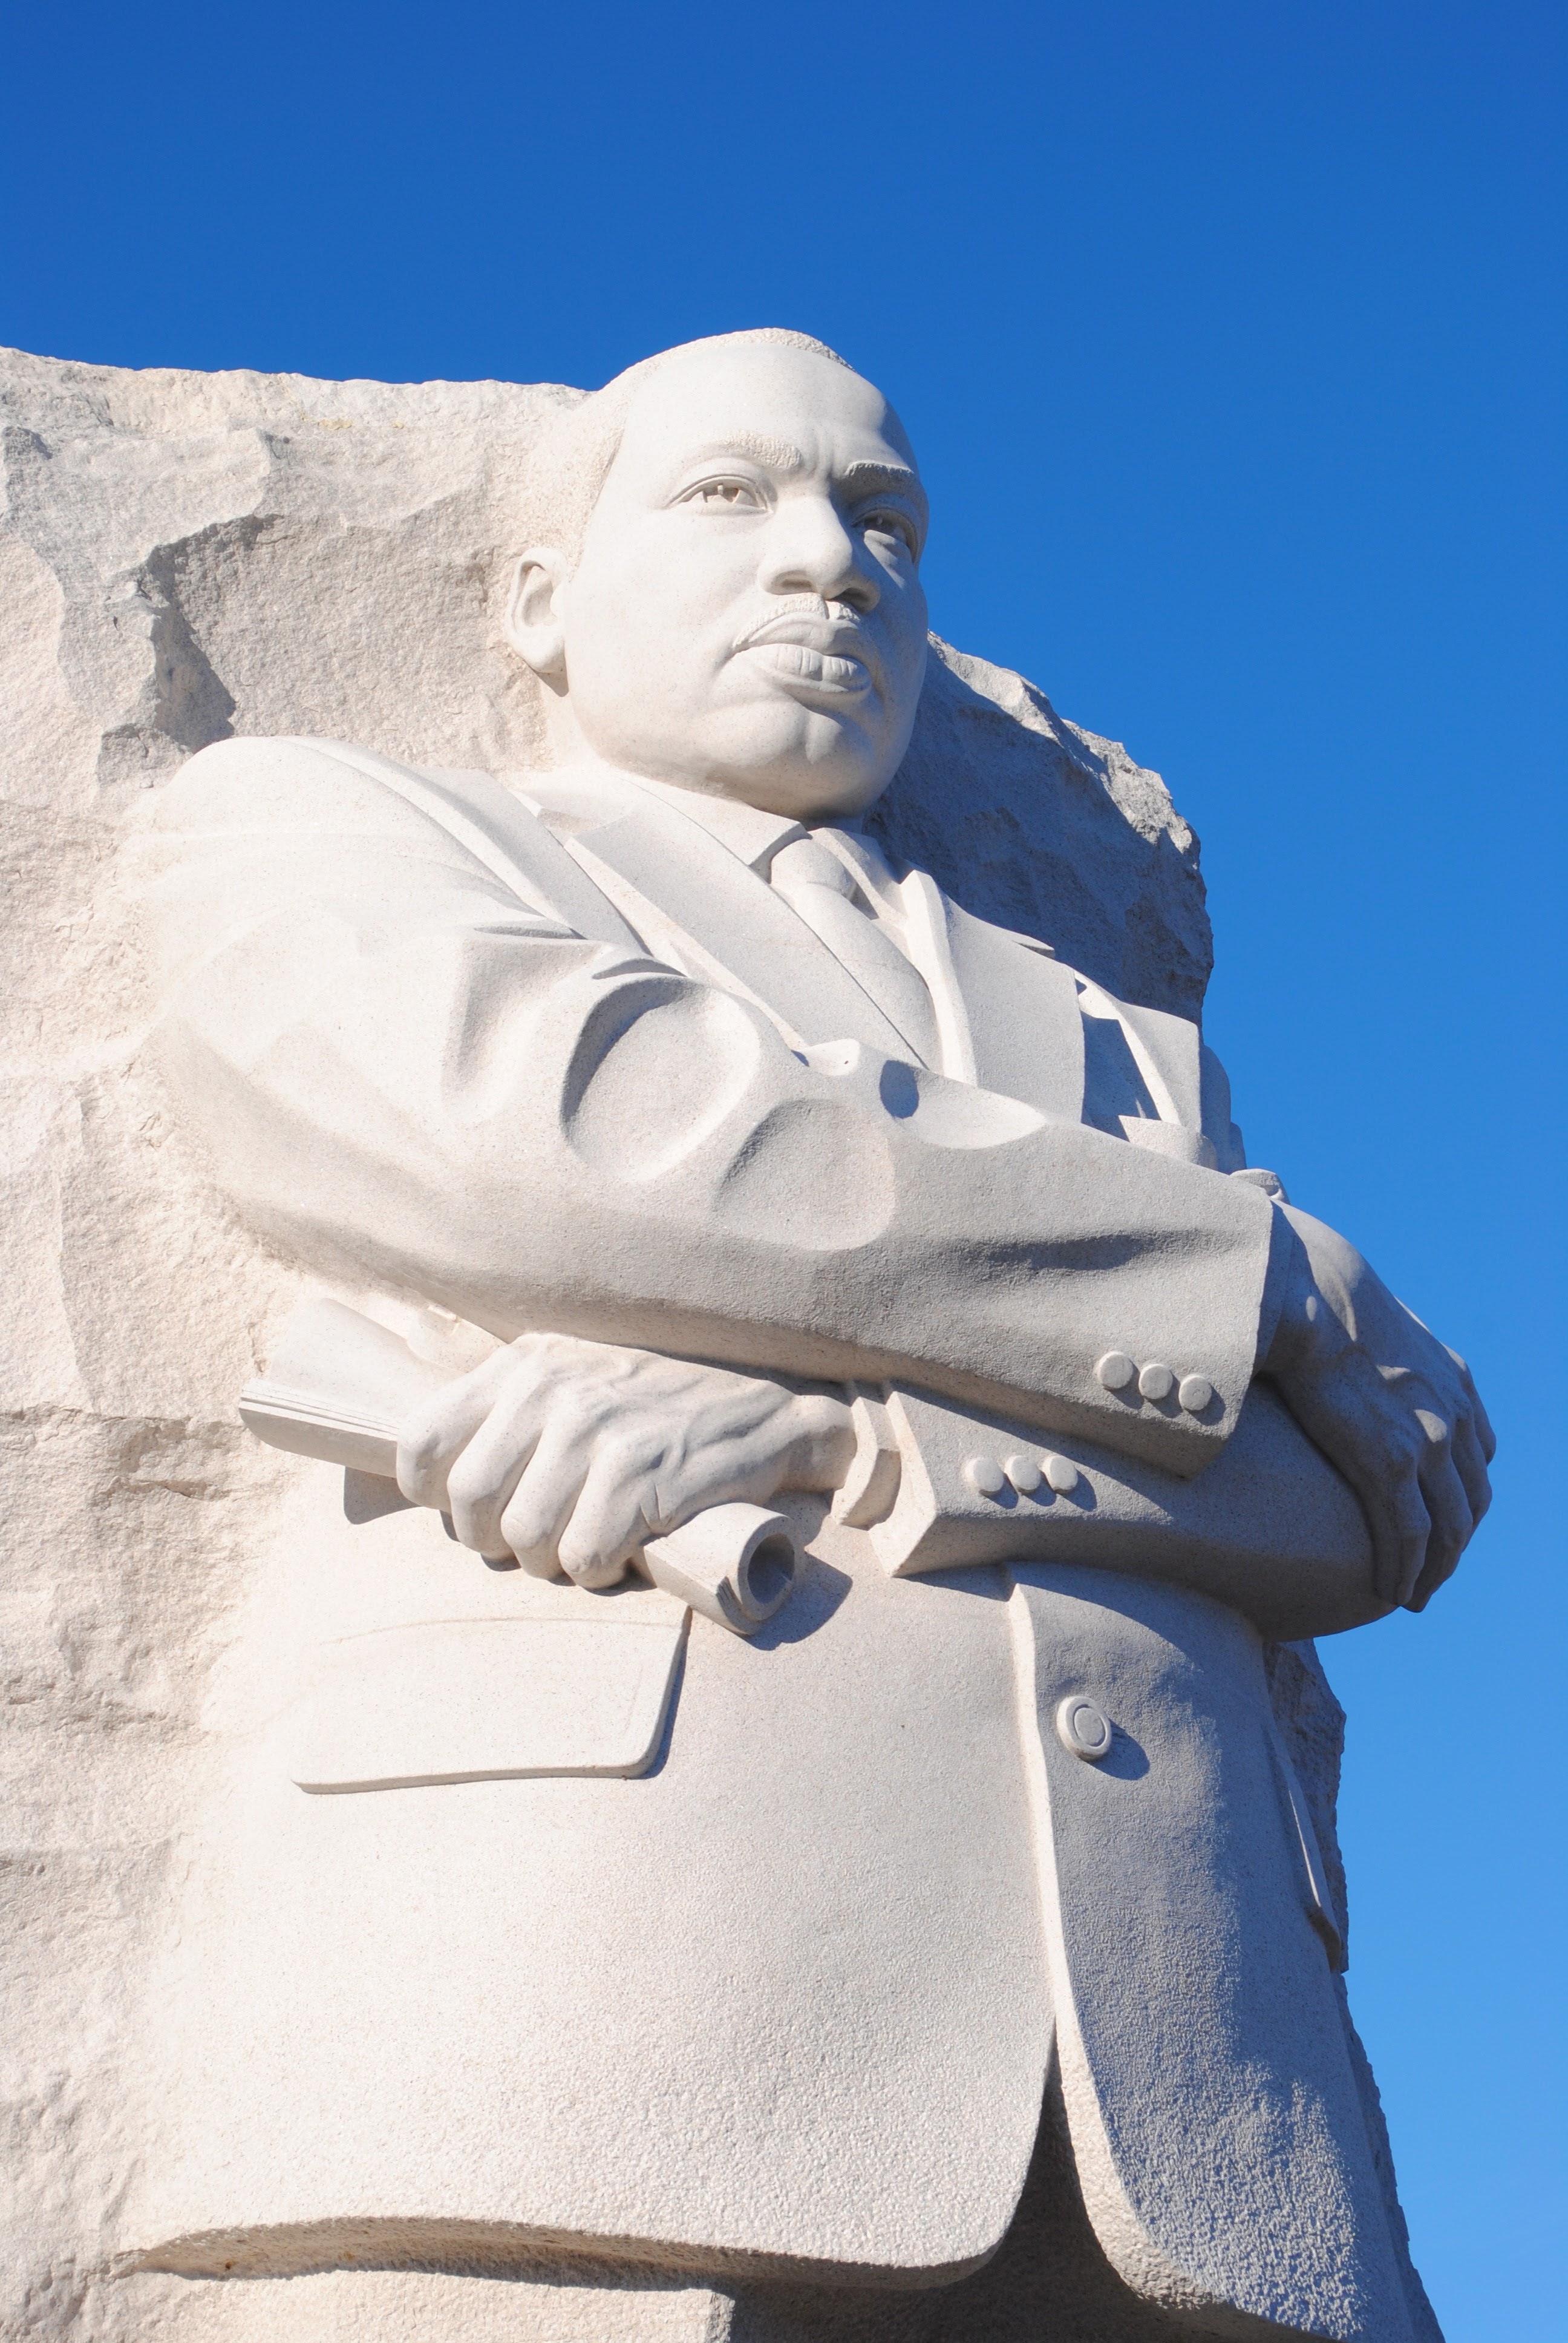 Martin Luther King, Jr. was such an inspirational volunteer leader that MLK Day is dedicated as a National Day of Service for inspiring volunteerism. 